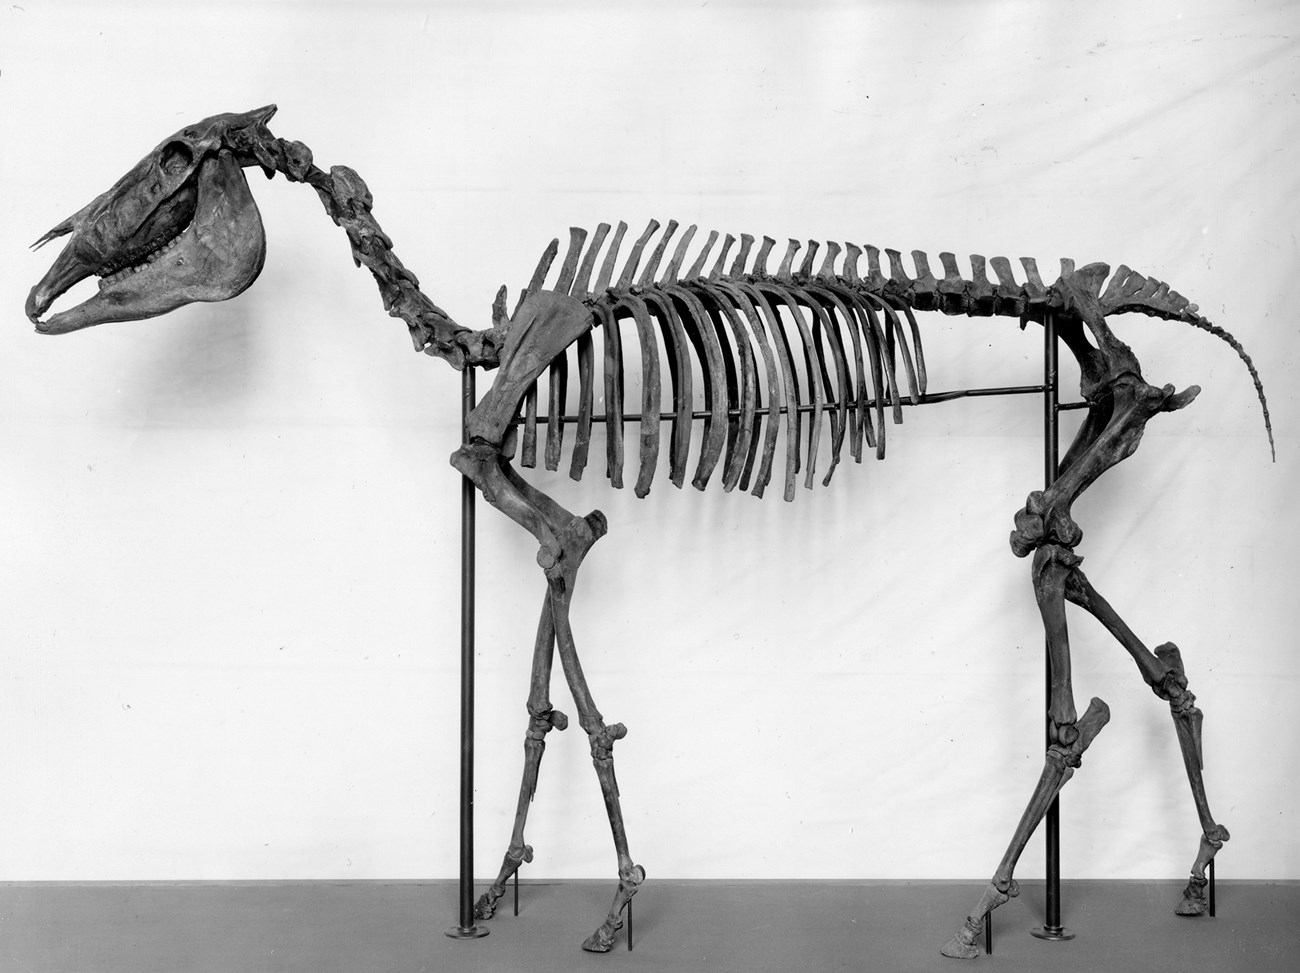 Black and white photo of a horse skeleton on display